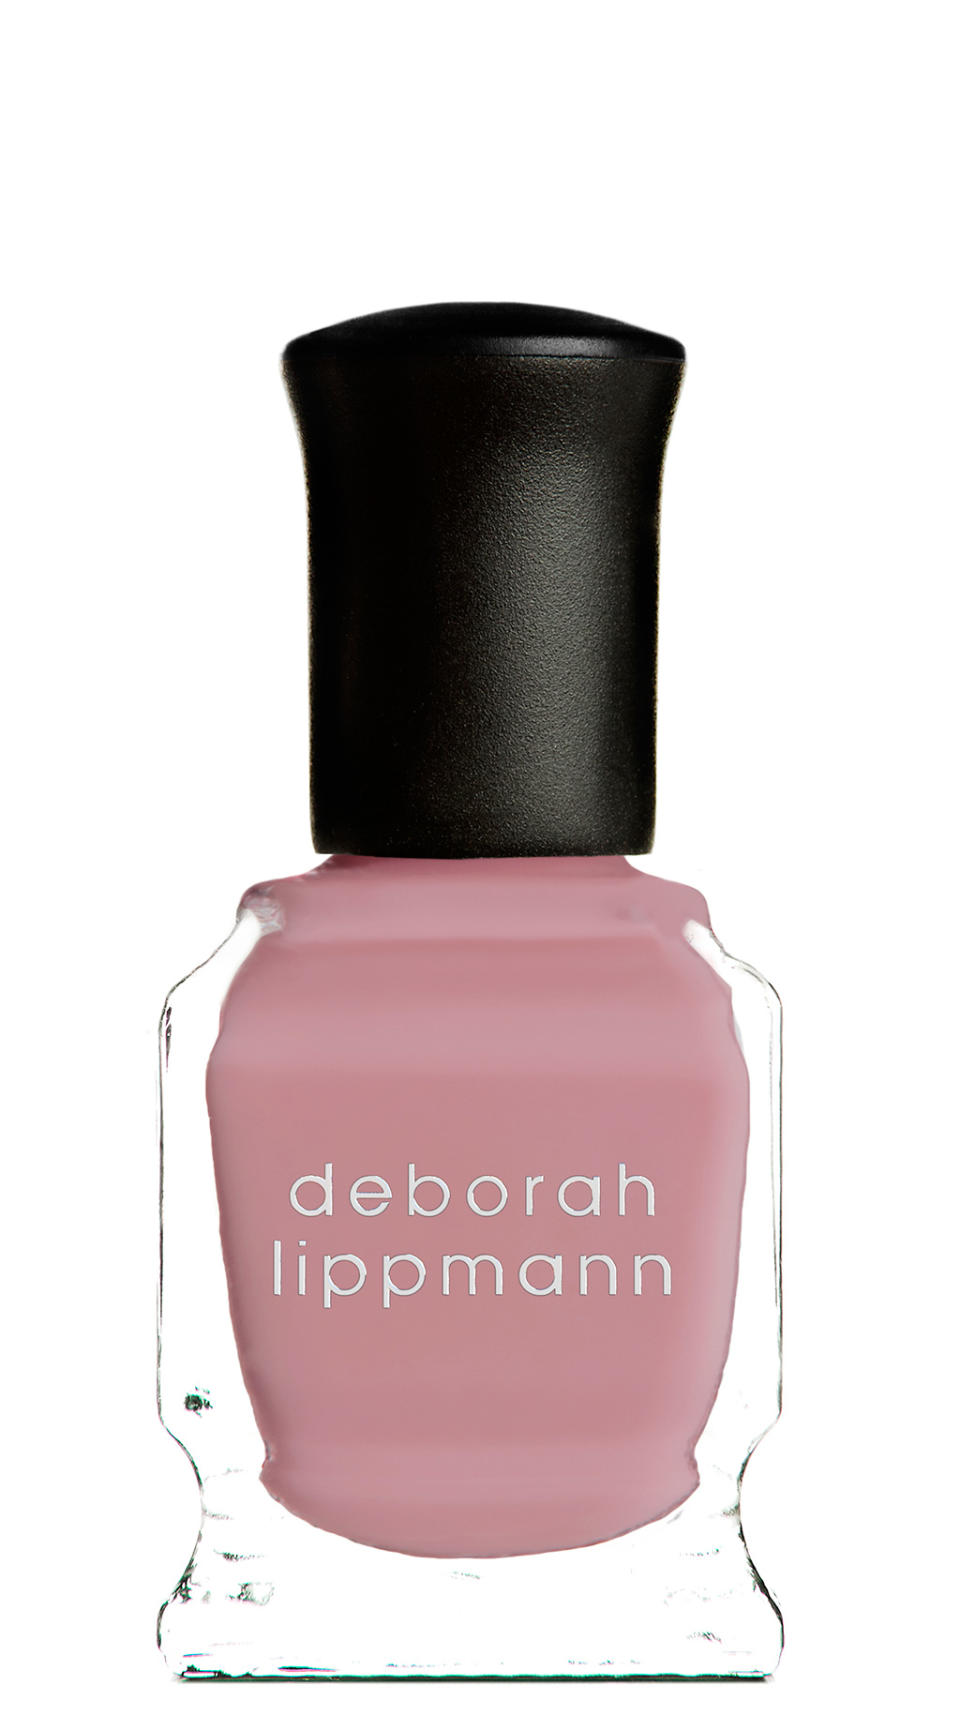 Deborah Lippmann Bed of Roses Collection – Trail of Petals